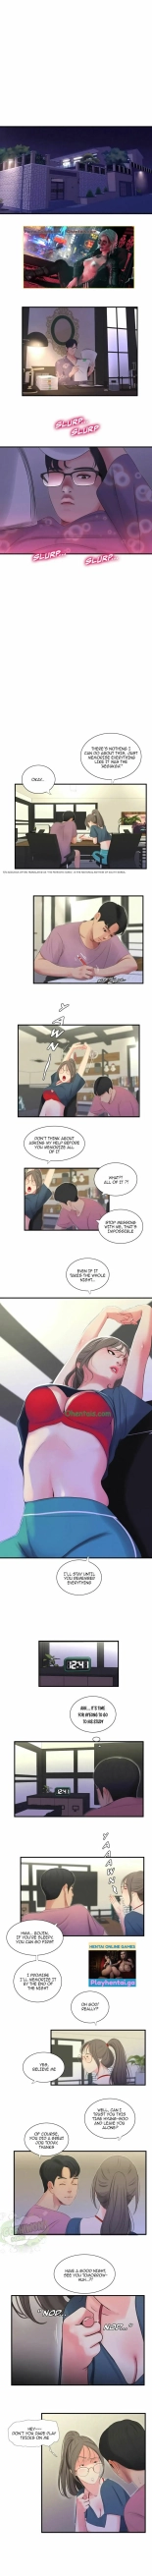 One's In-Laws Virgins Ch. 19-20 : page 6